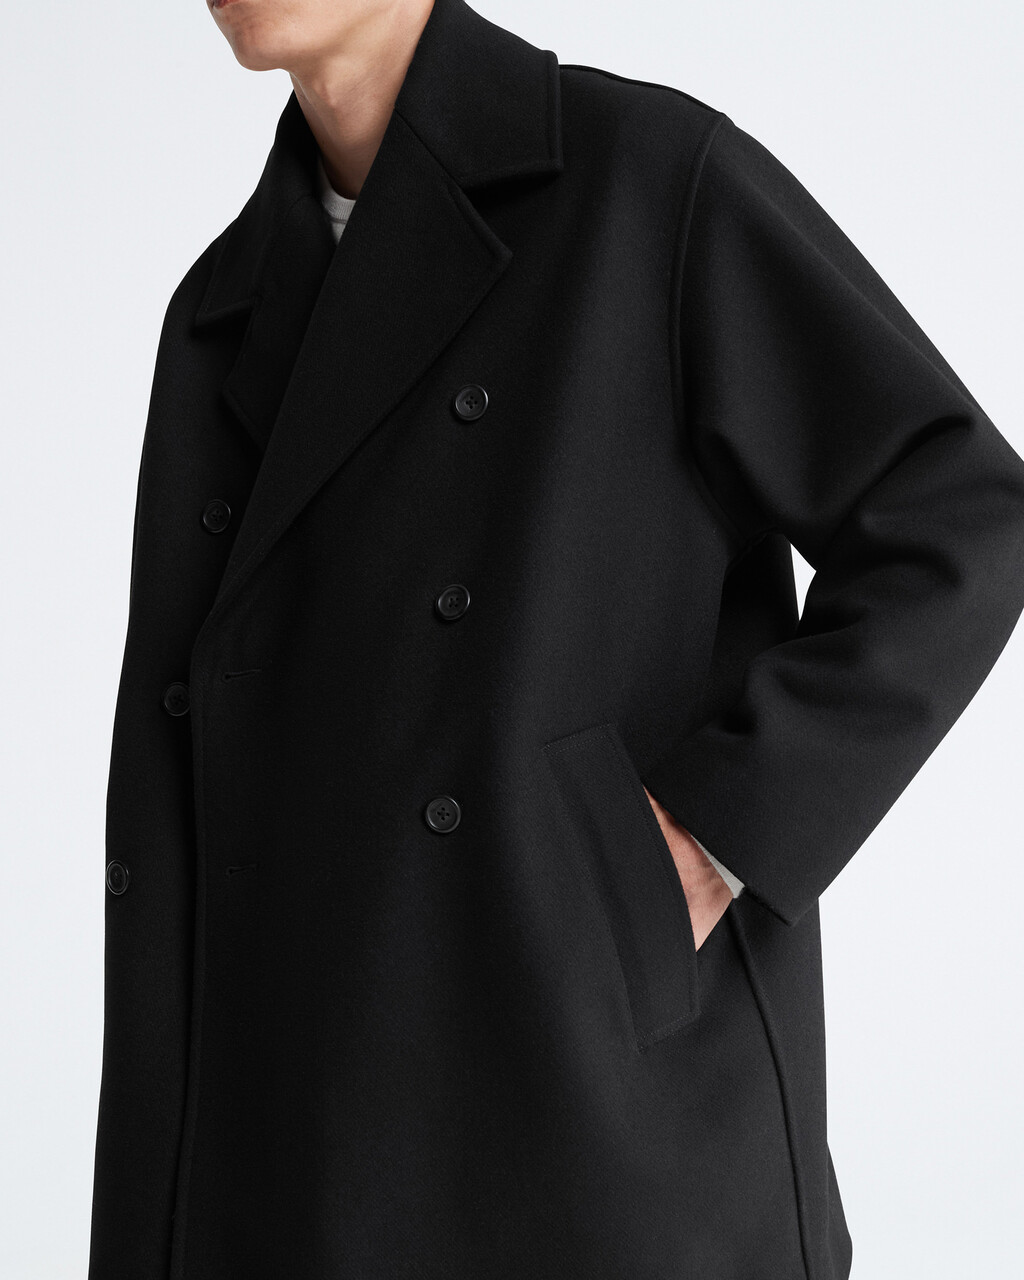 Wool Blend Double Breasted Peacoat, Black Beauty, hi-res